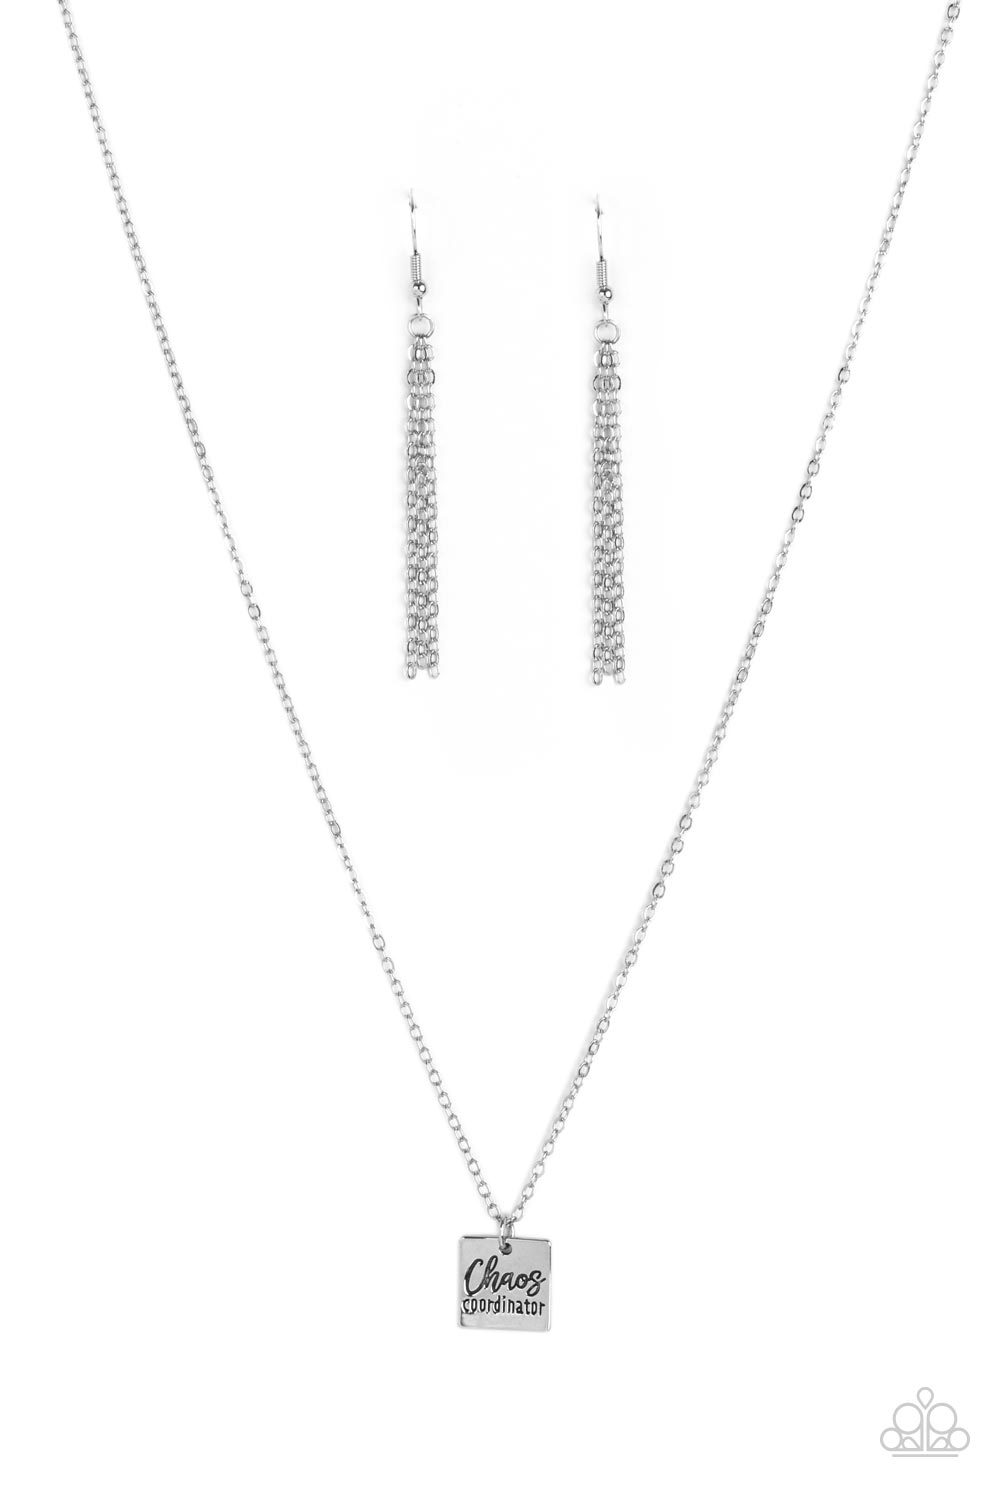 Chaos Coordinator Paparazzi Accessories Necklace with Earrings - Silver